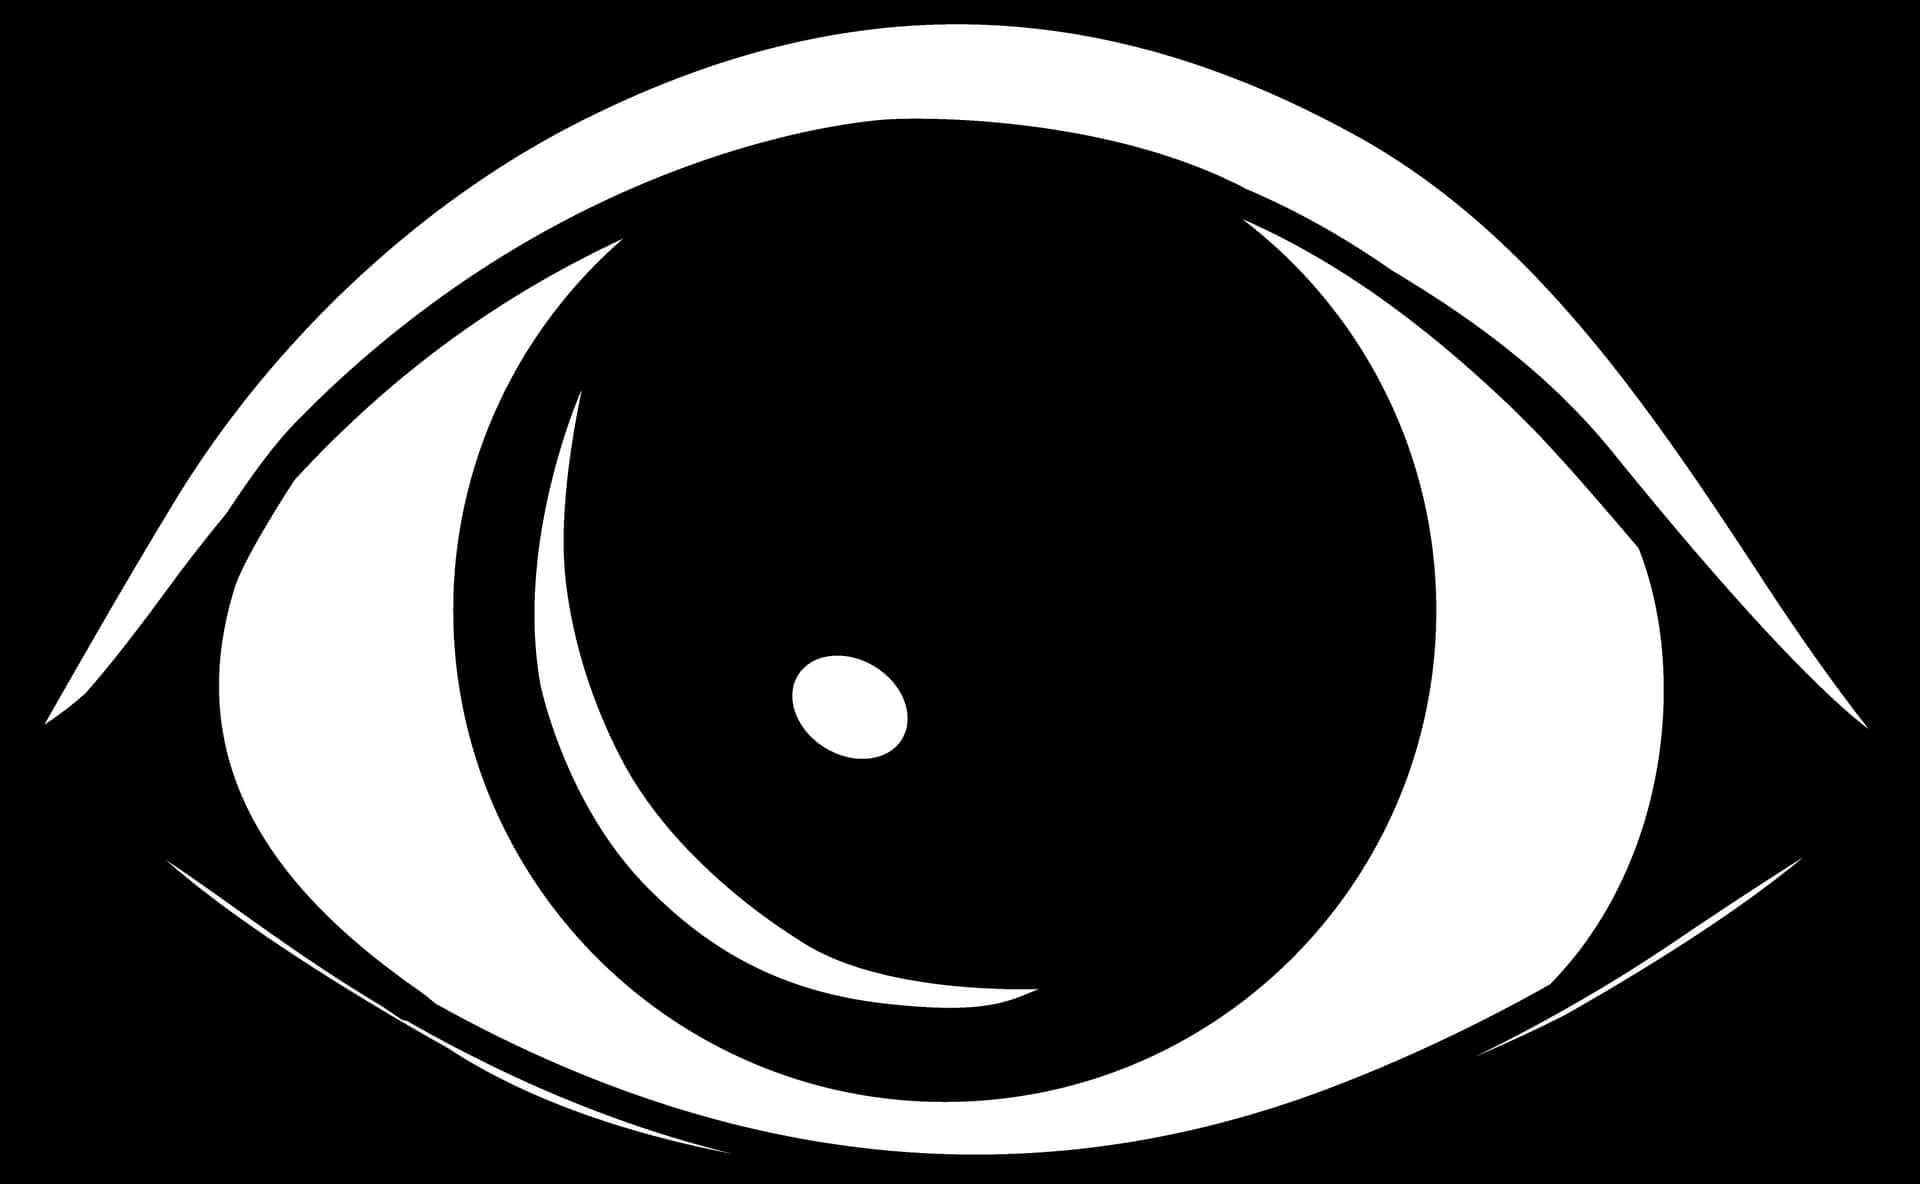 Abstract Eye Graphic Blackand White PNG